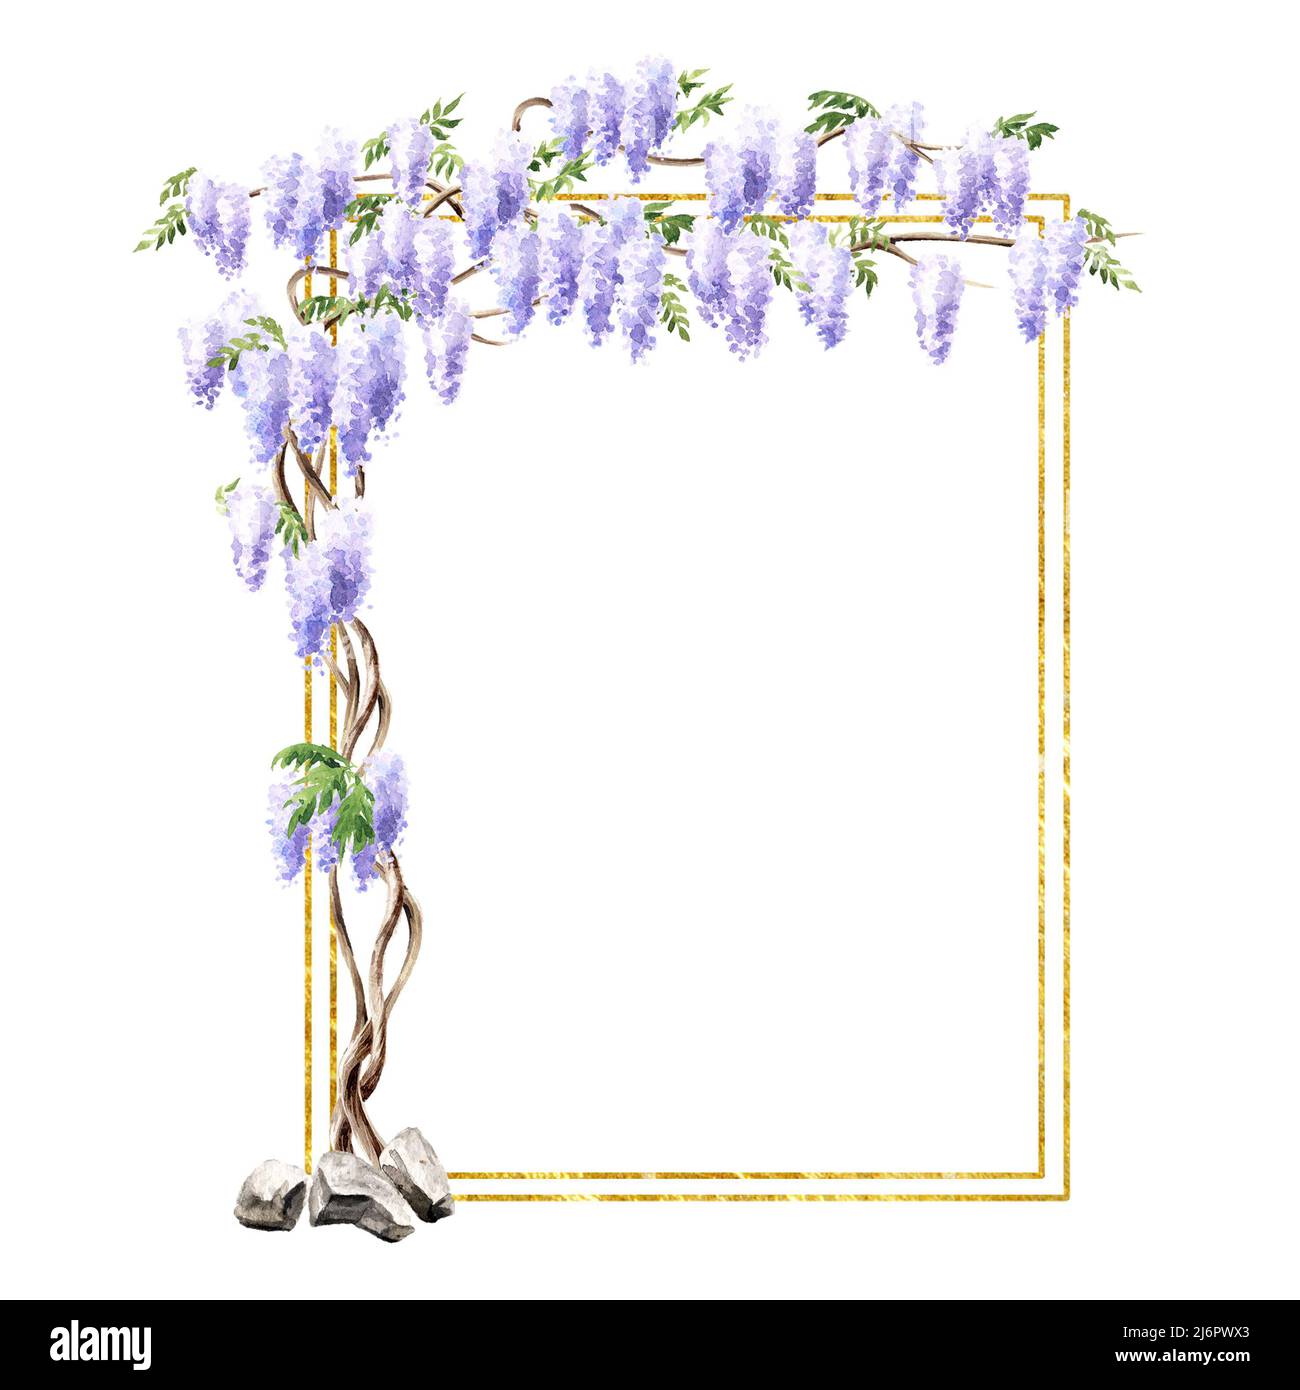 Wisteria blossom tree arch.  Hand  drawn watercolor  illustration isolated on white background Stock Photo